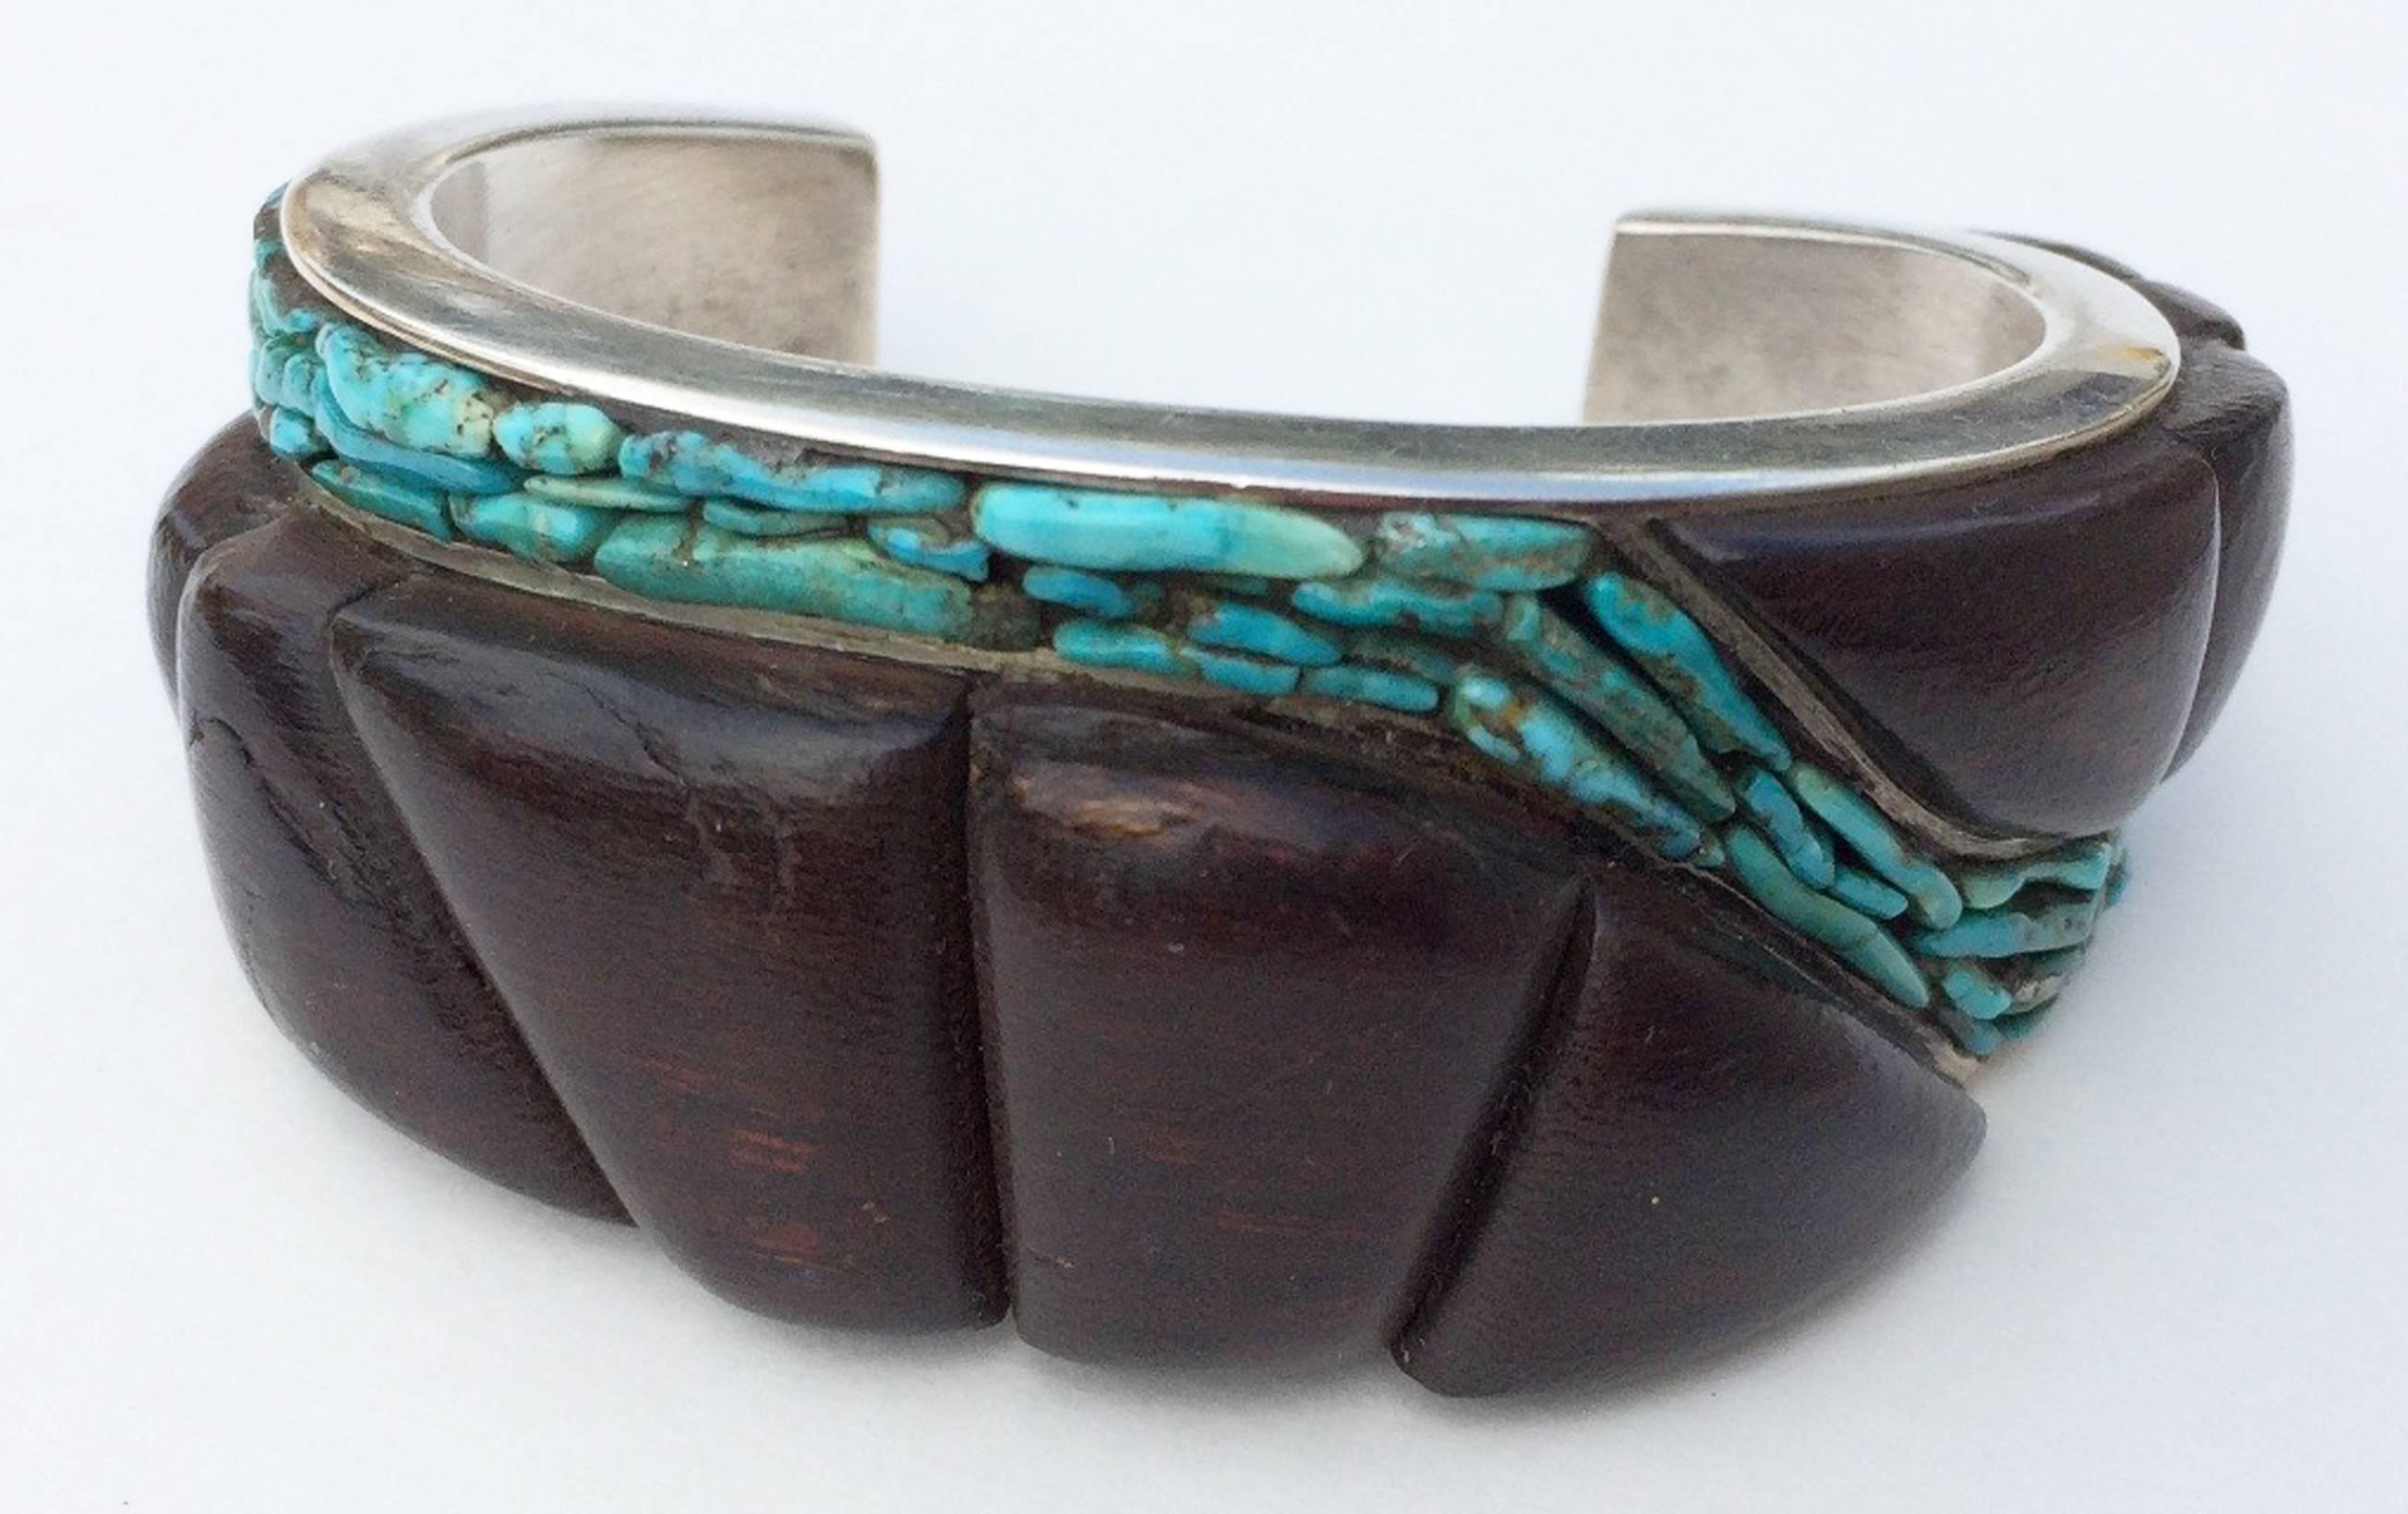 A fine and rare Paul Durkee studio modernist cuff bracelet. Signed sterling silver item features channel set carved and polished ironwood and turquoise nuggets in a free form organic setting. Outstanding design and execution. 1.25